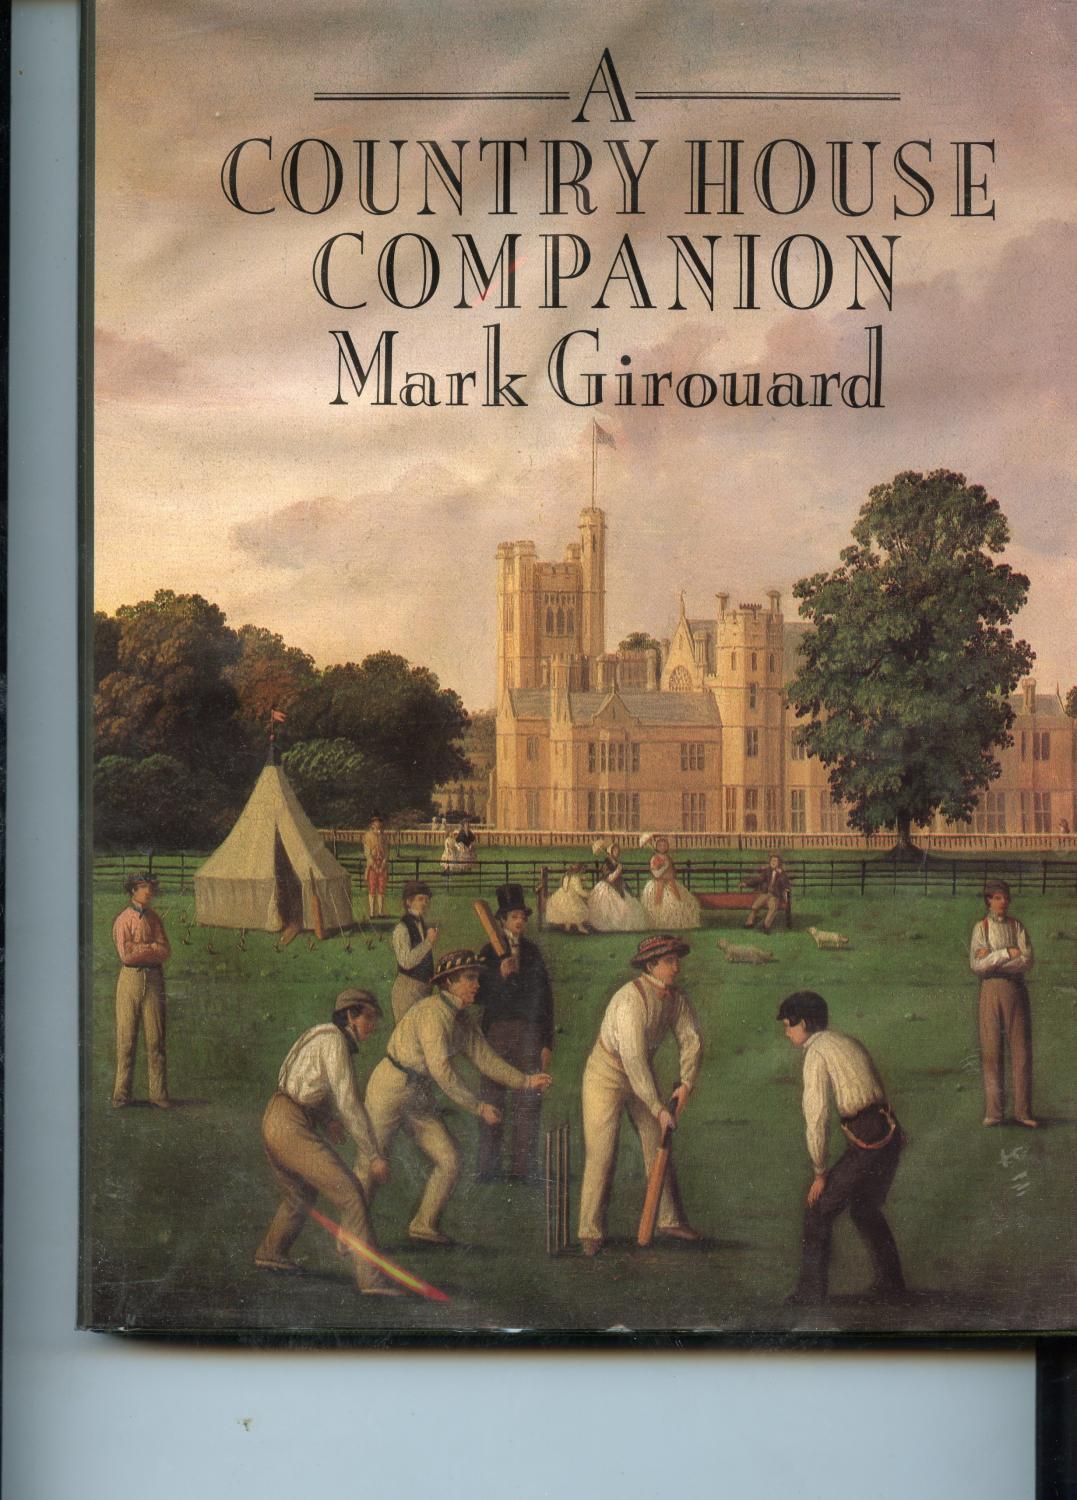 The Country House Companion